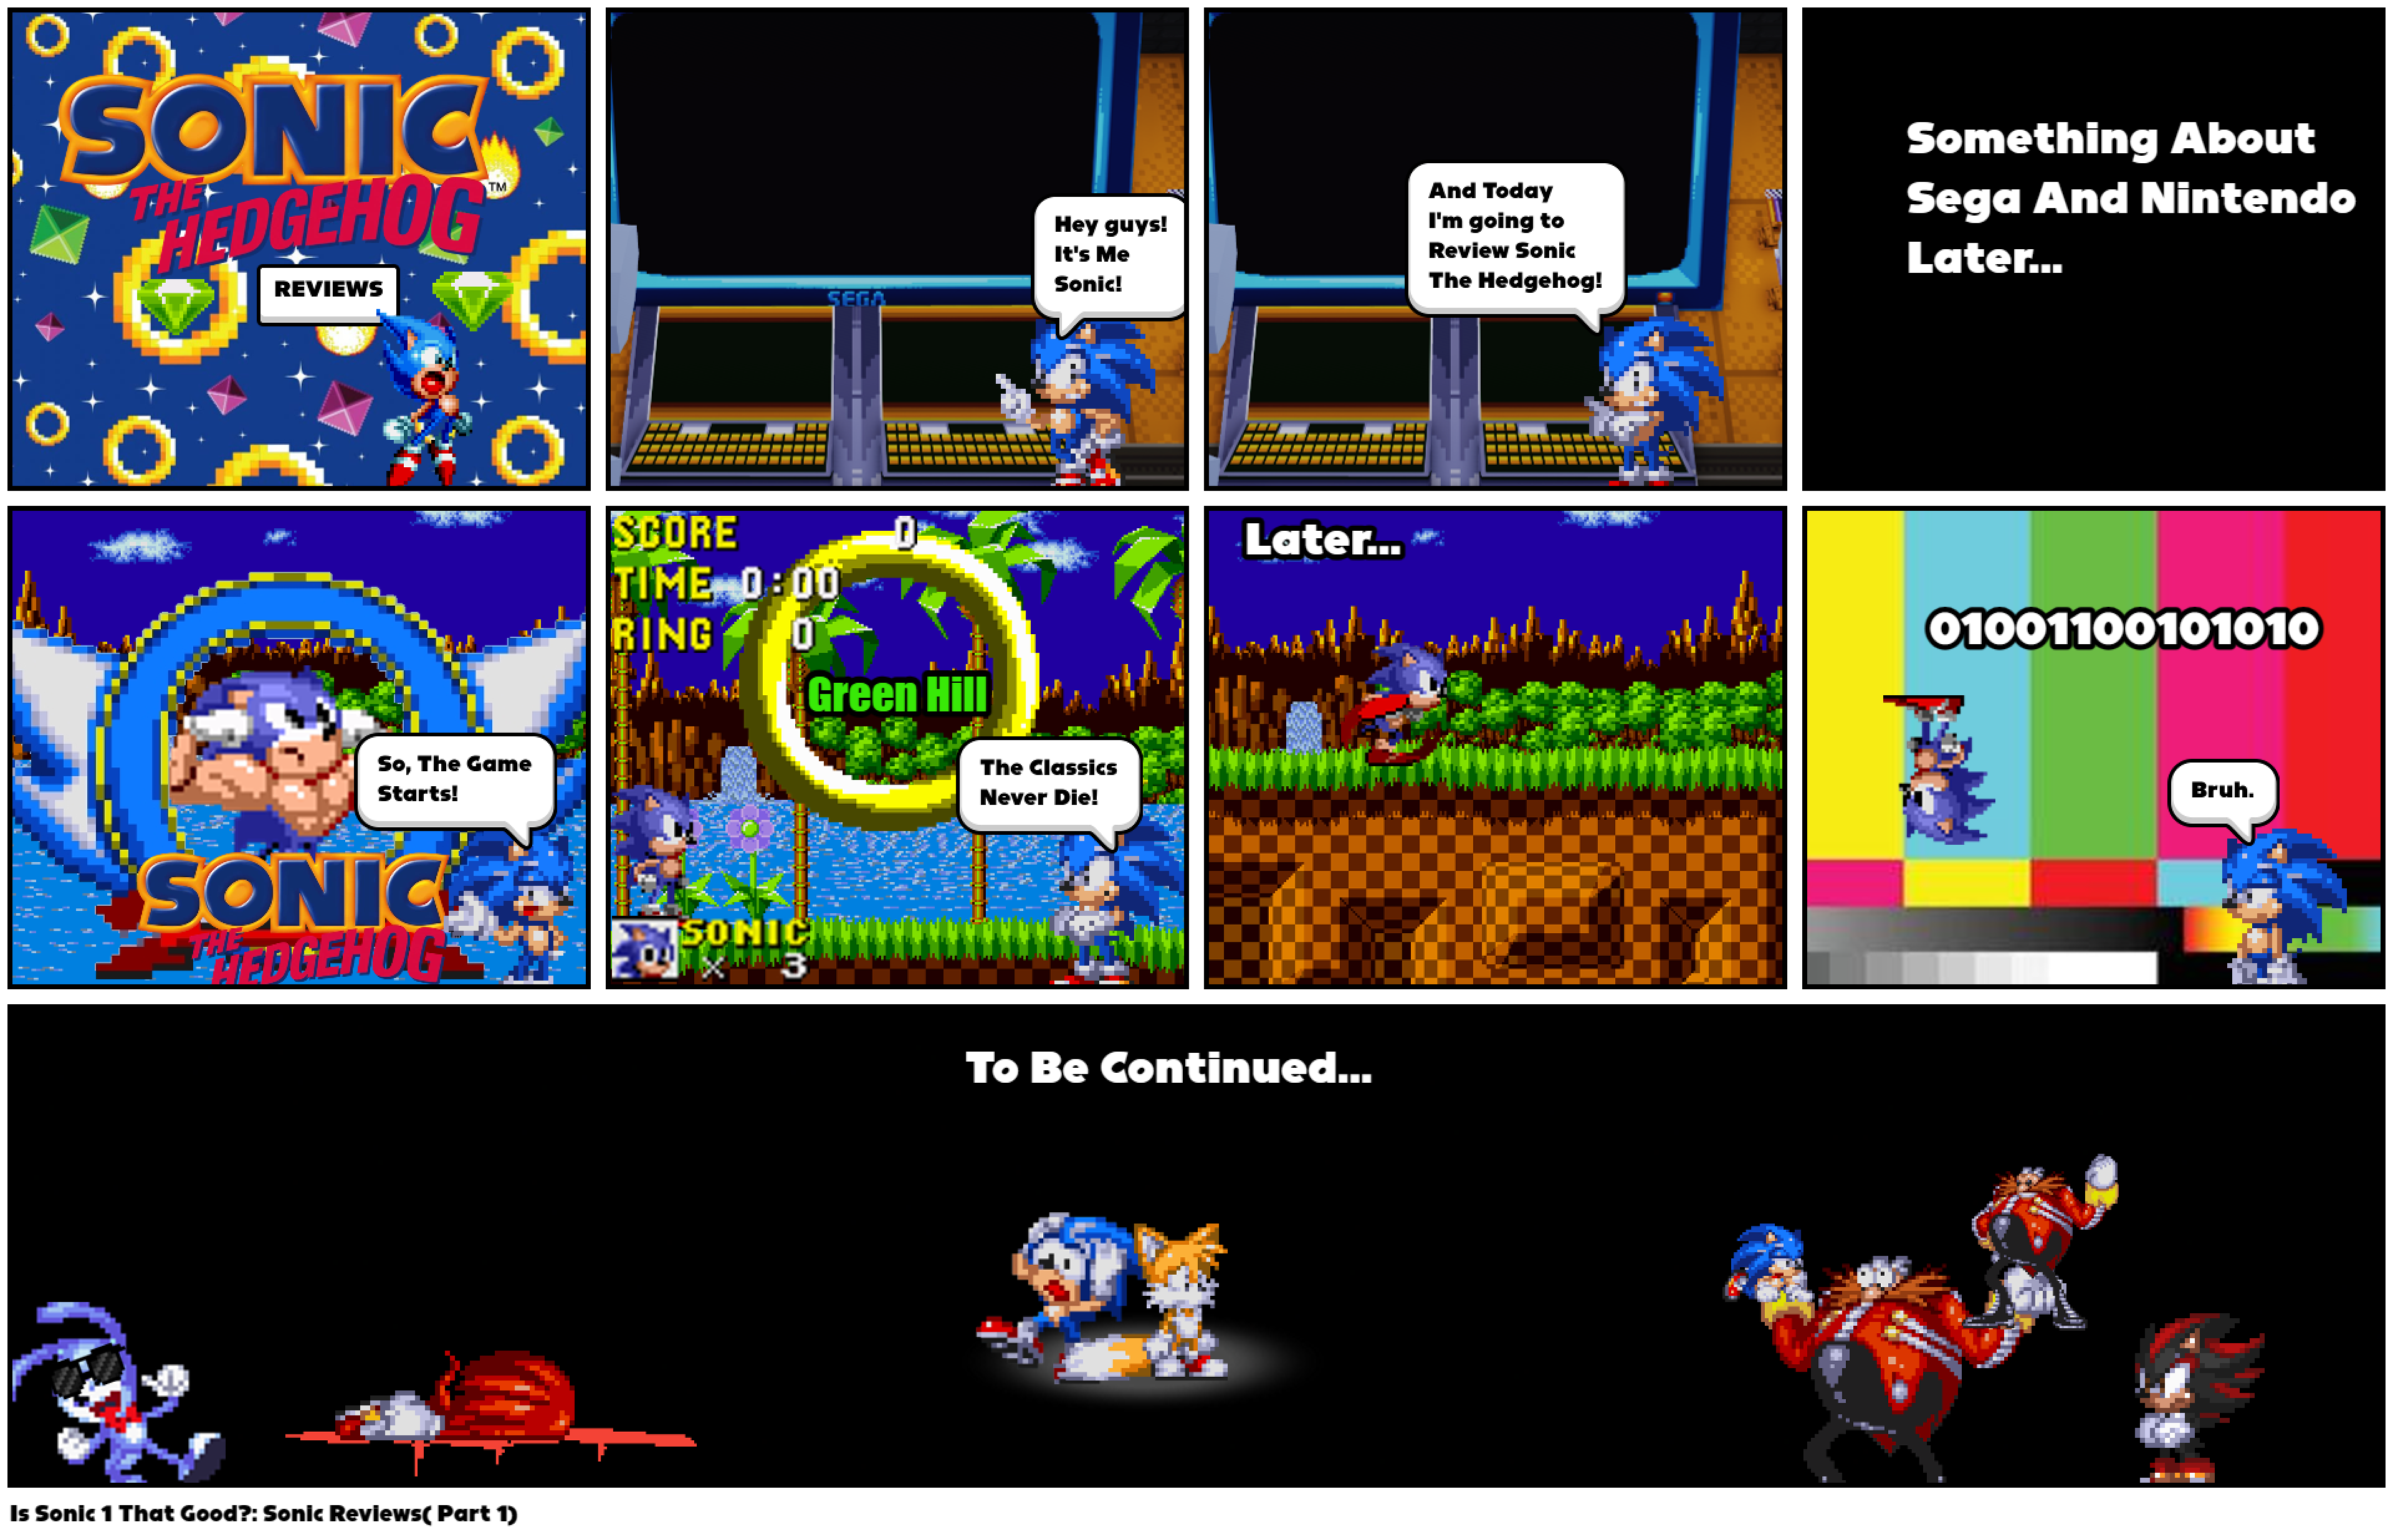 Is Sonic 1 That Good?: Sonic Reviews( Part 1)